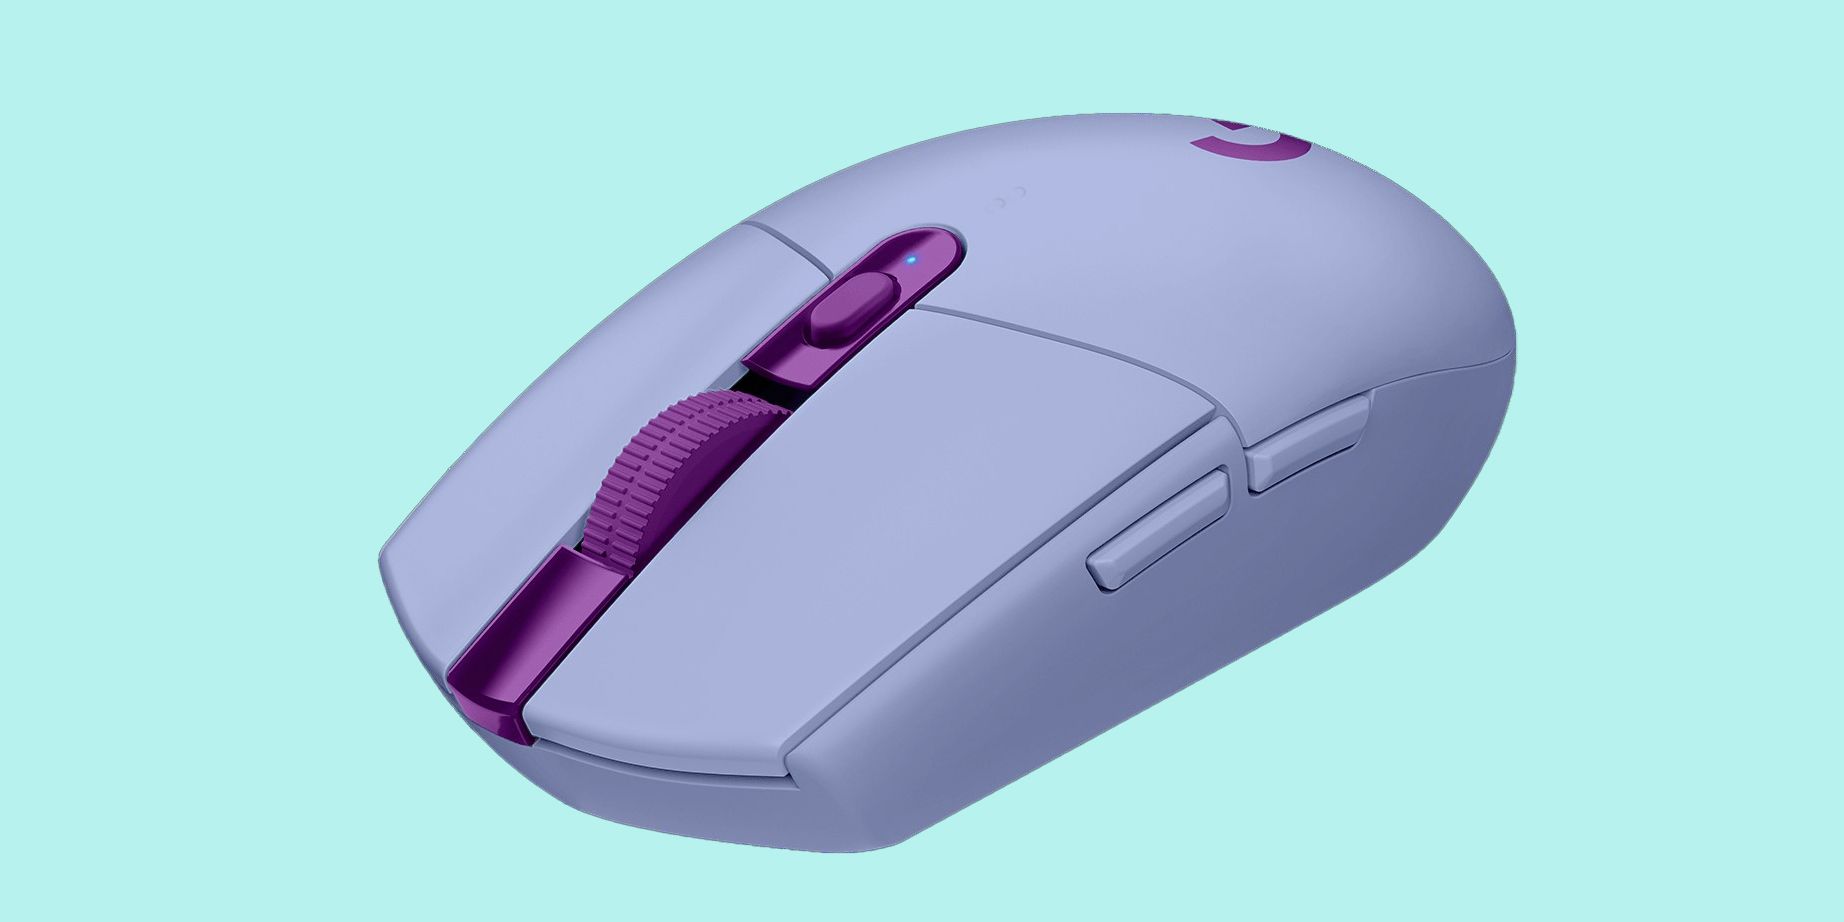 Logitech G305 Wireless mouse in Lilac